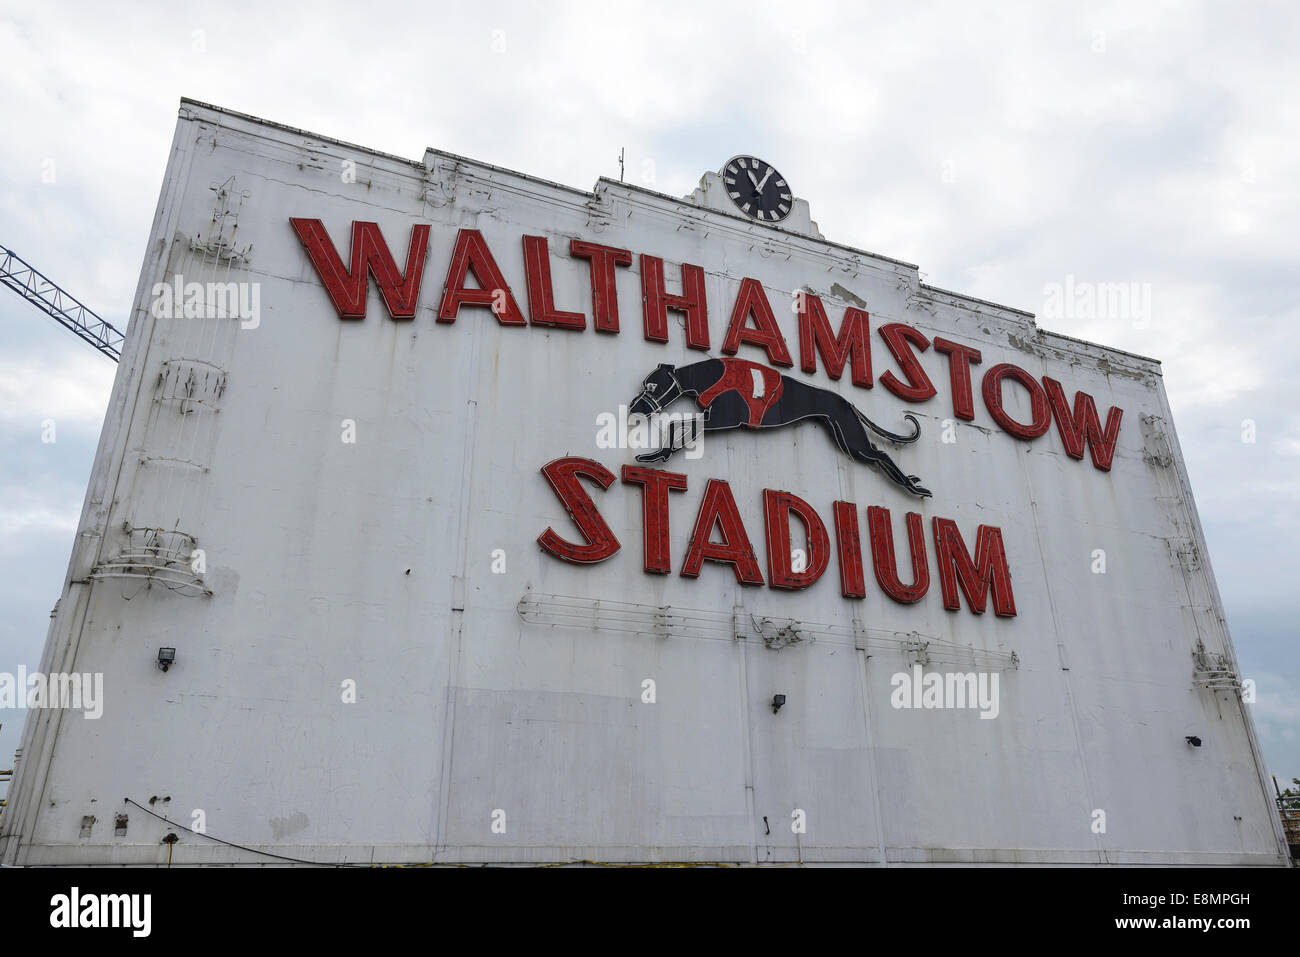 The Grade II listed Walthamstow Stadium Tote building Stock Photo